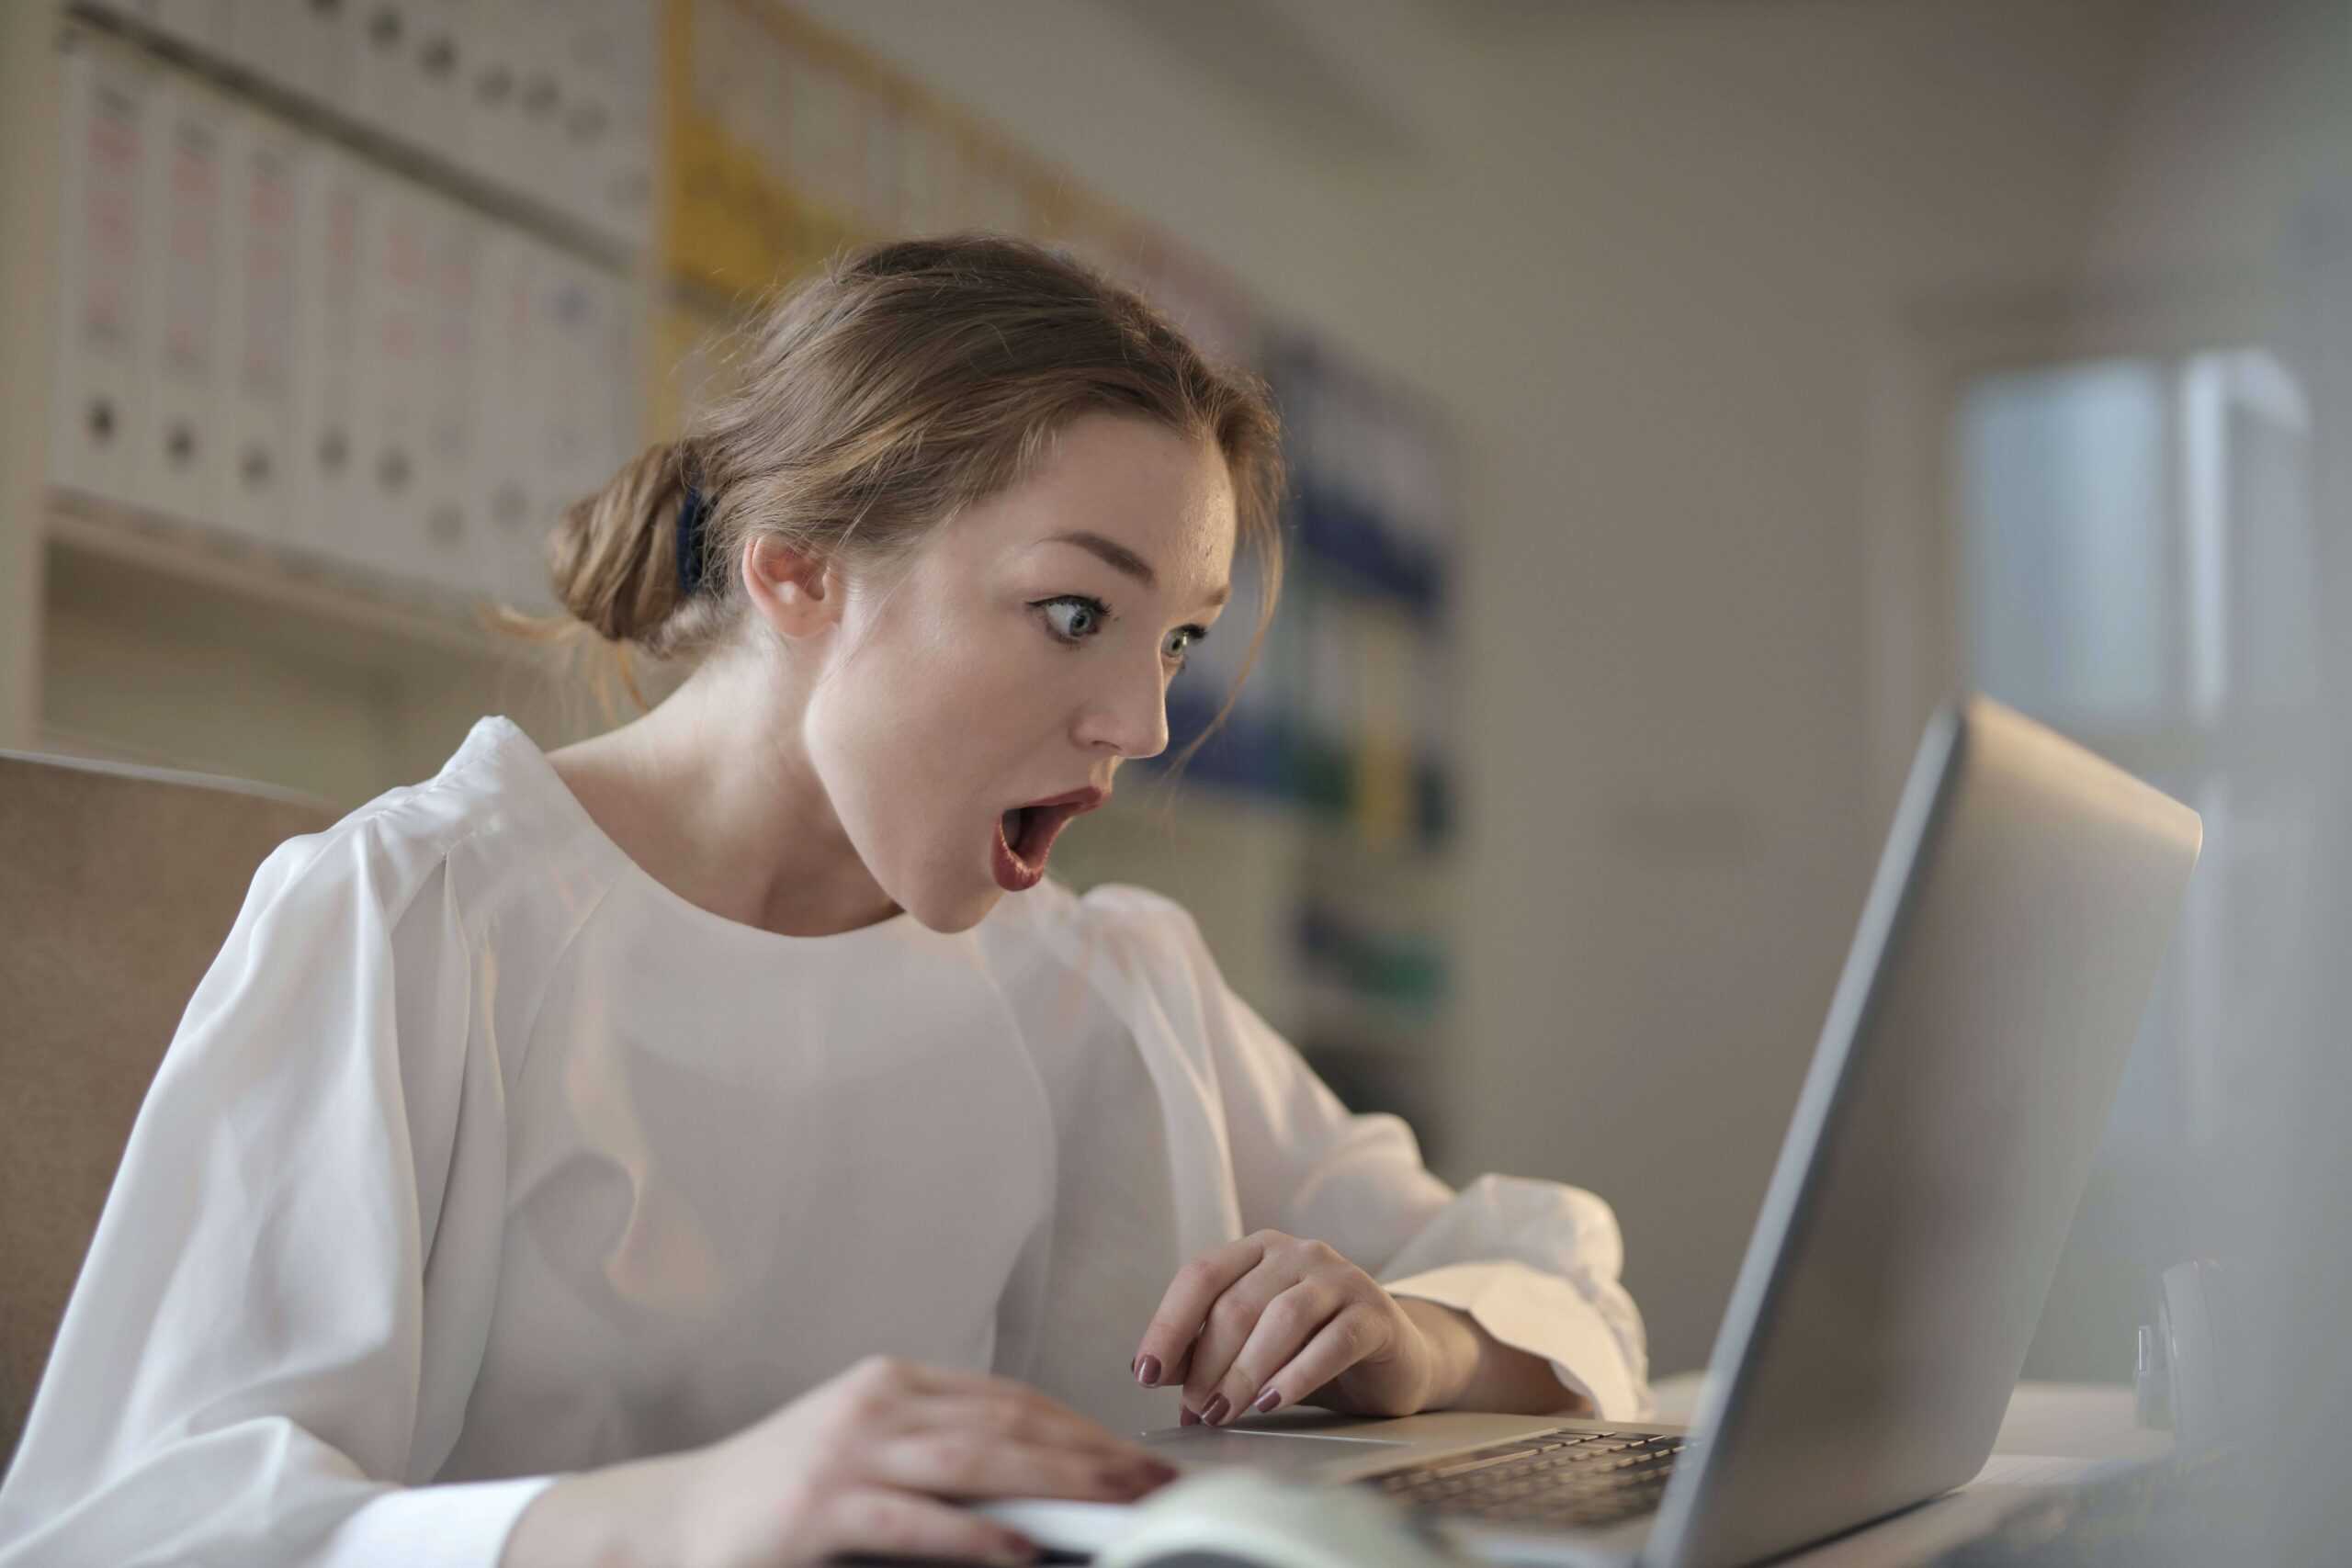 An employee looks at their computer in shock, having just unwittingly become an insider threat.